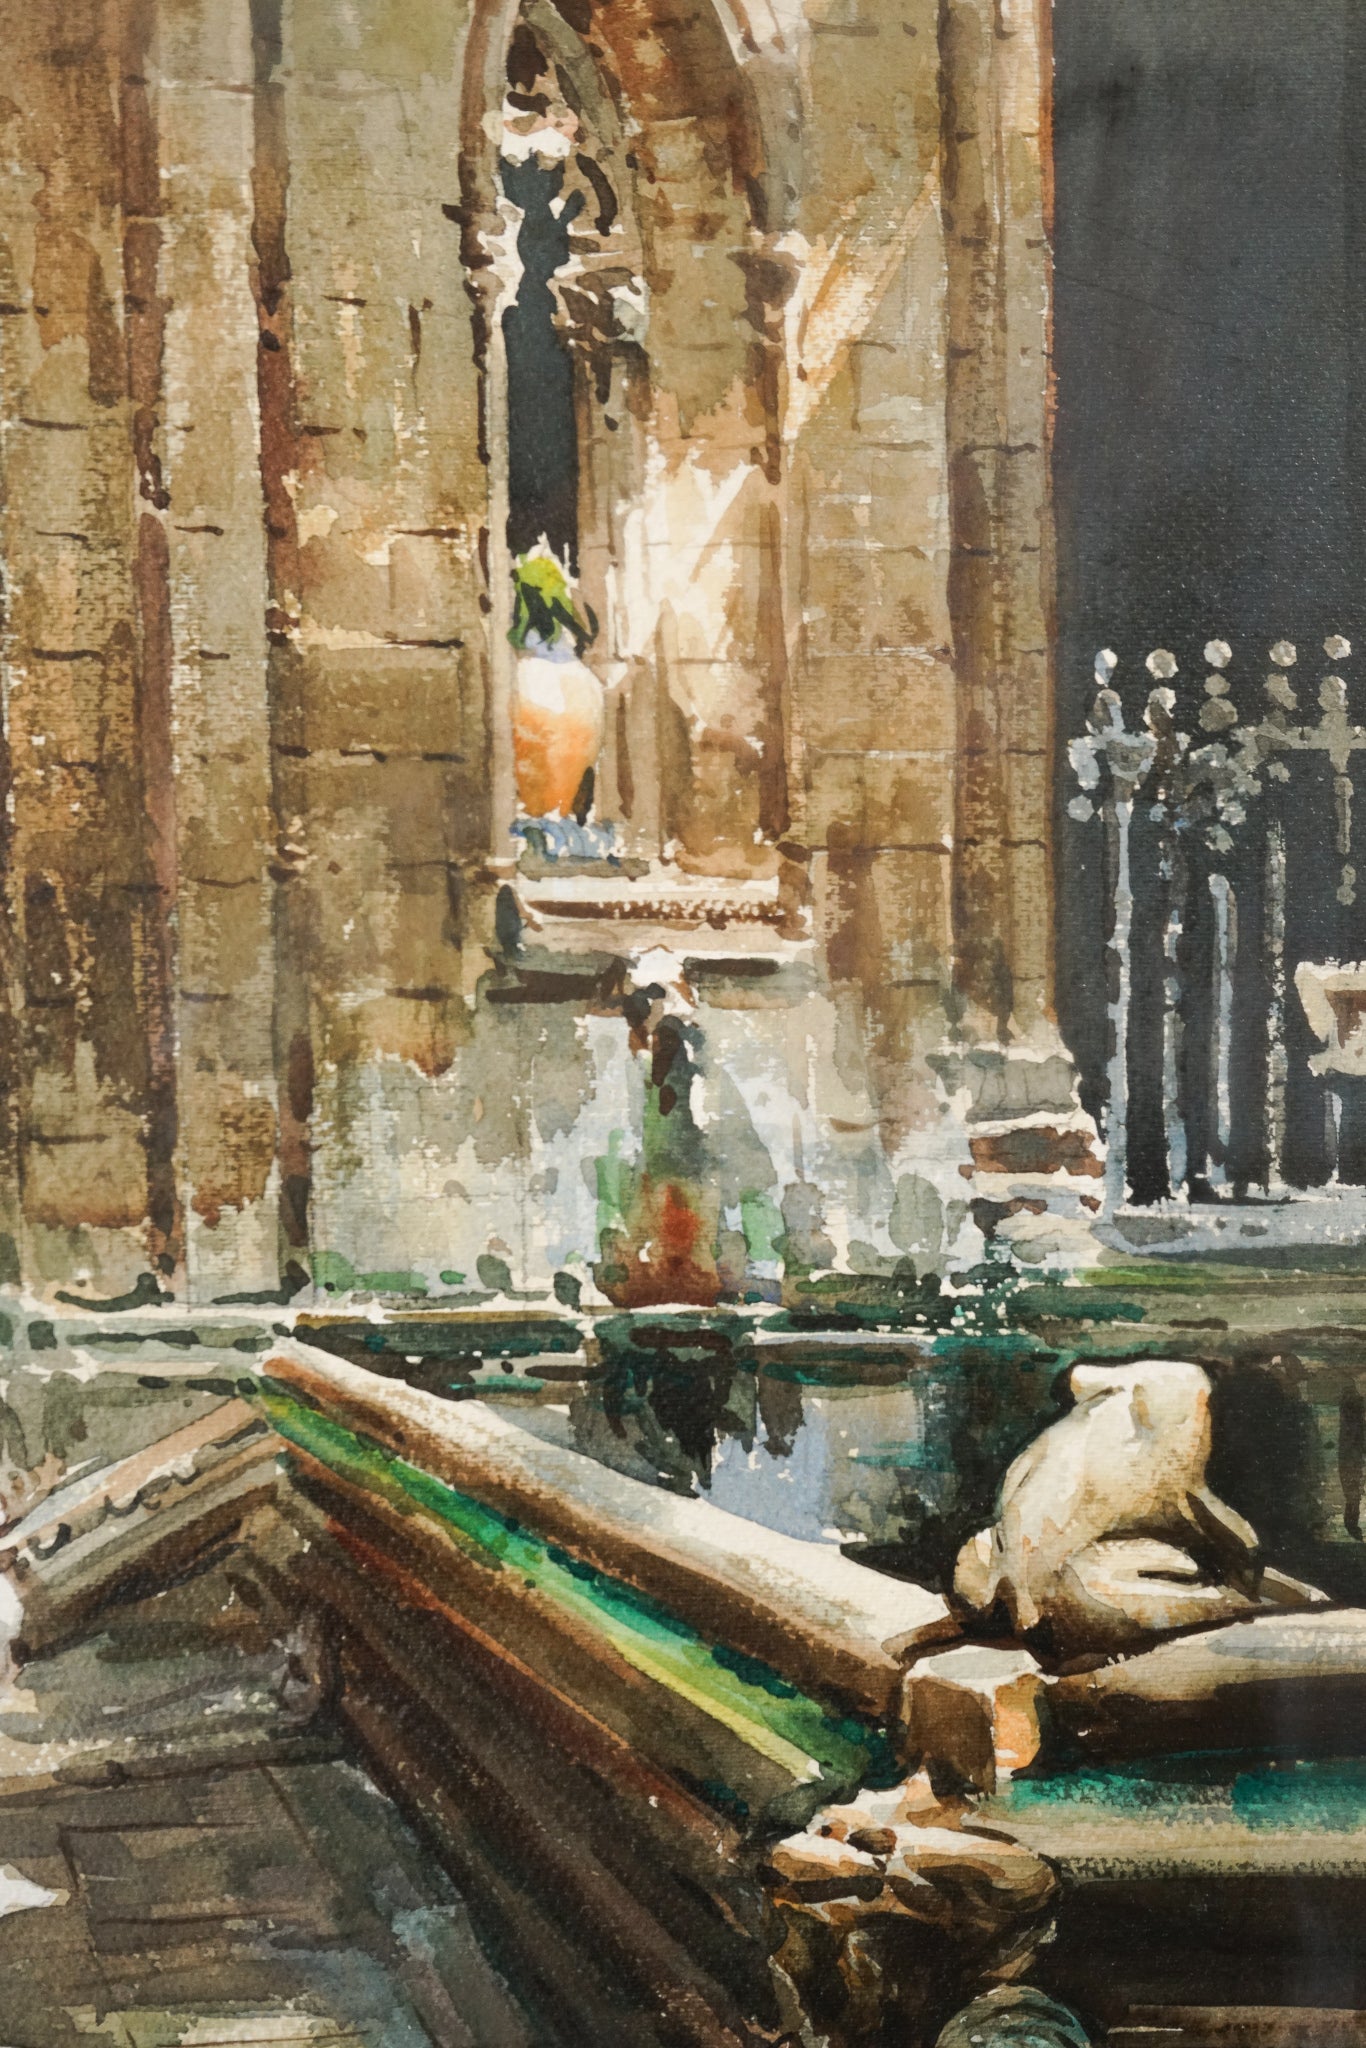 Geese and a Stone Frog by a Cathedral Pond - Large Watercolour - F. Clavero